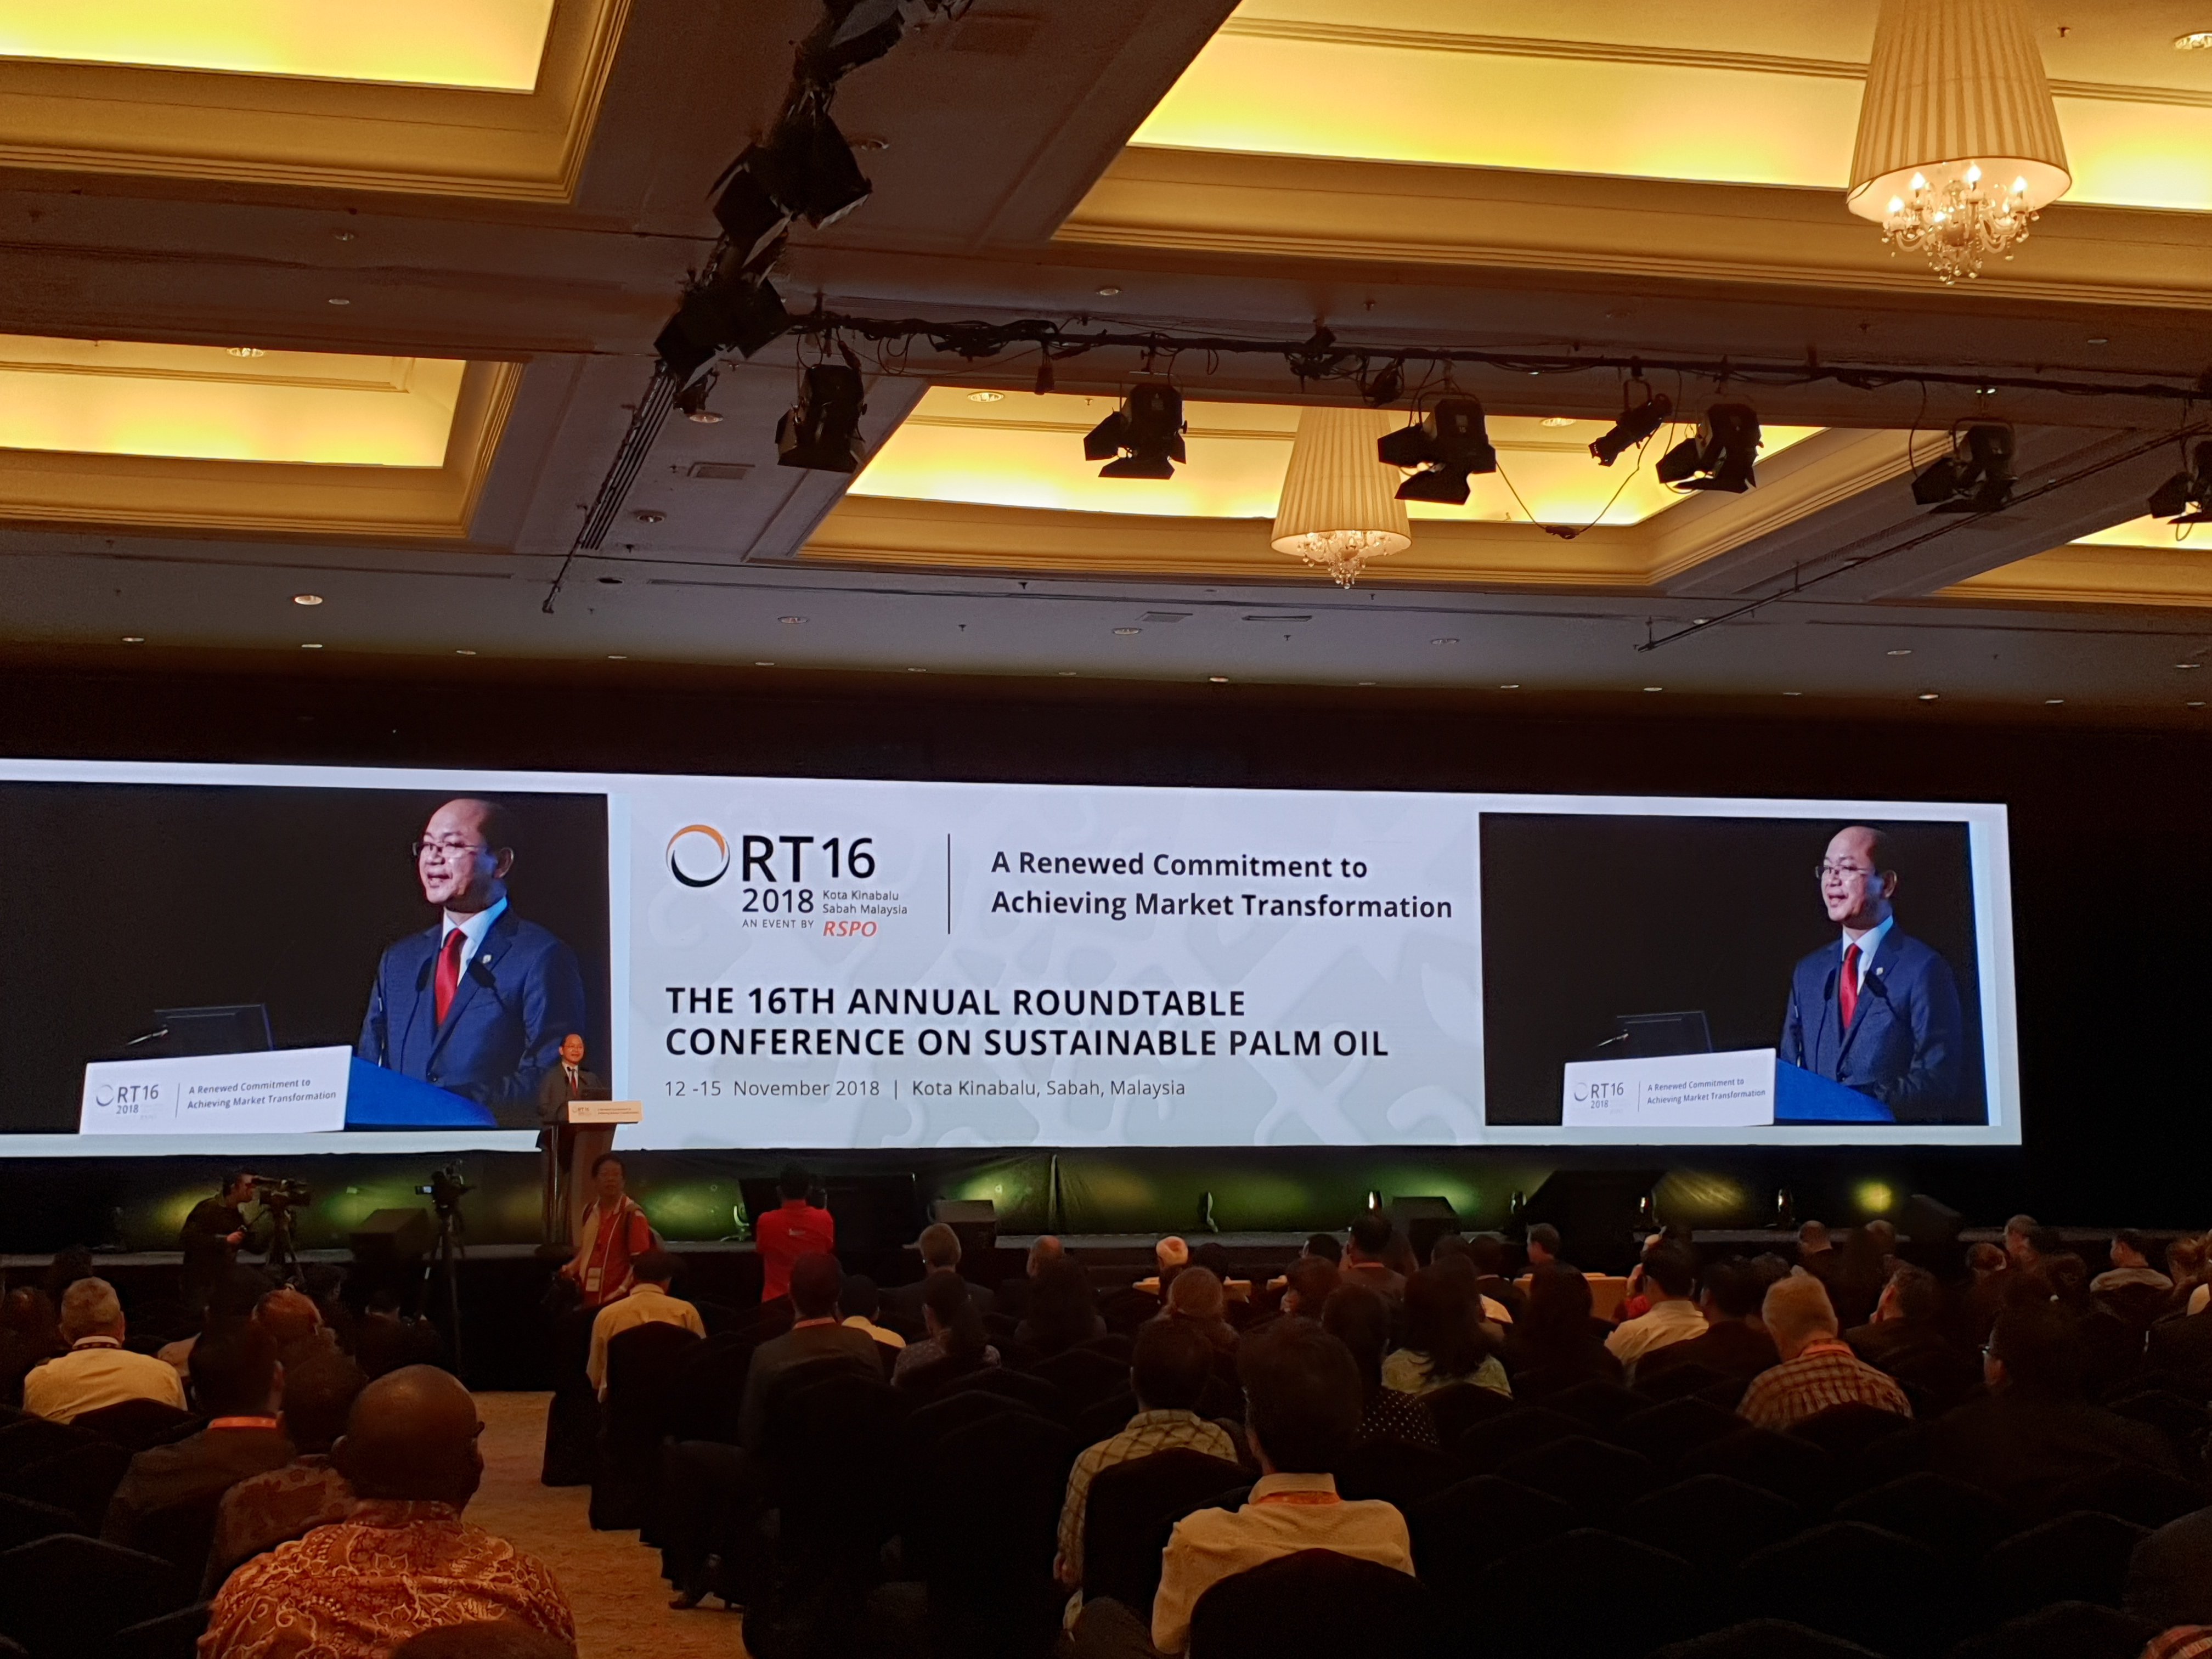 16th Annual Roundtable Conference on Sustainable Palm Oil (RT16)